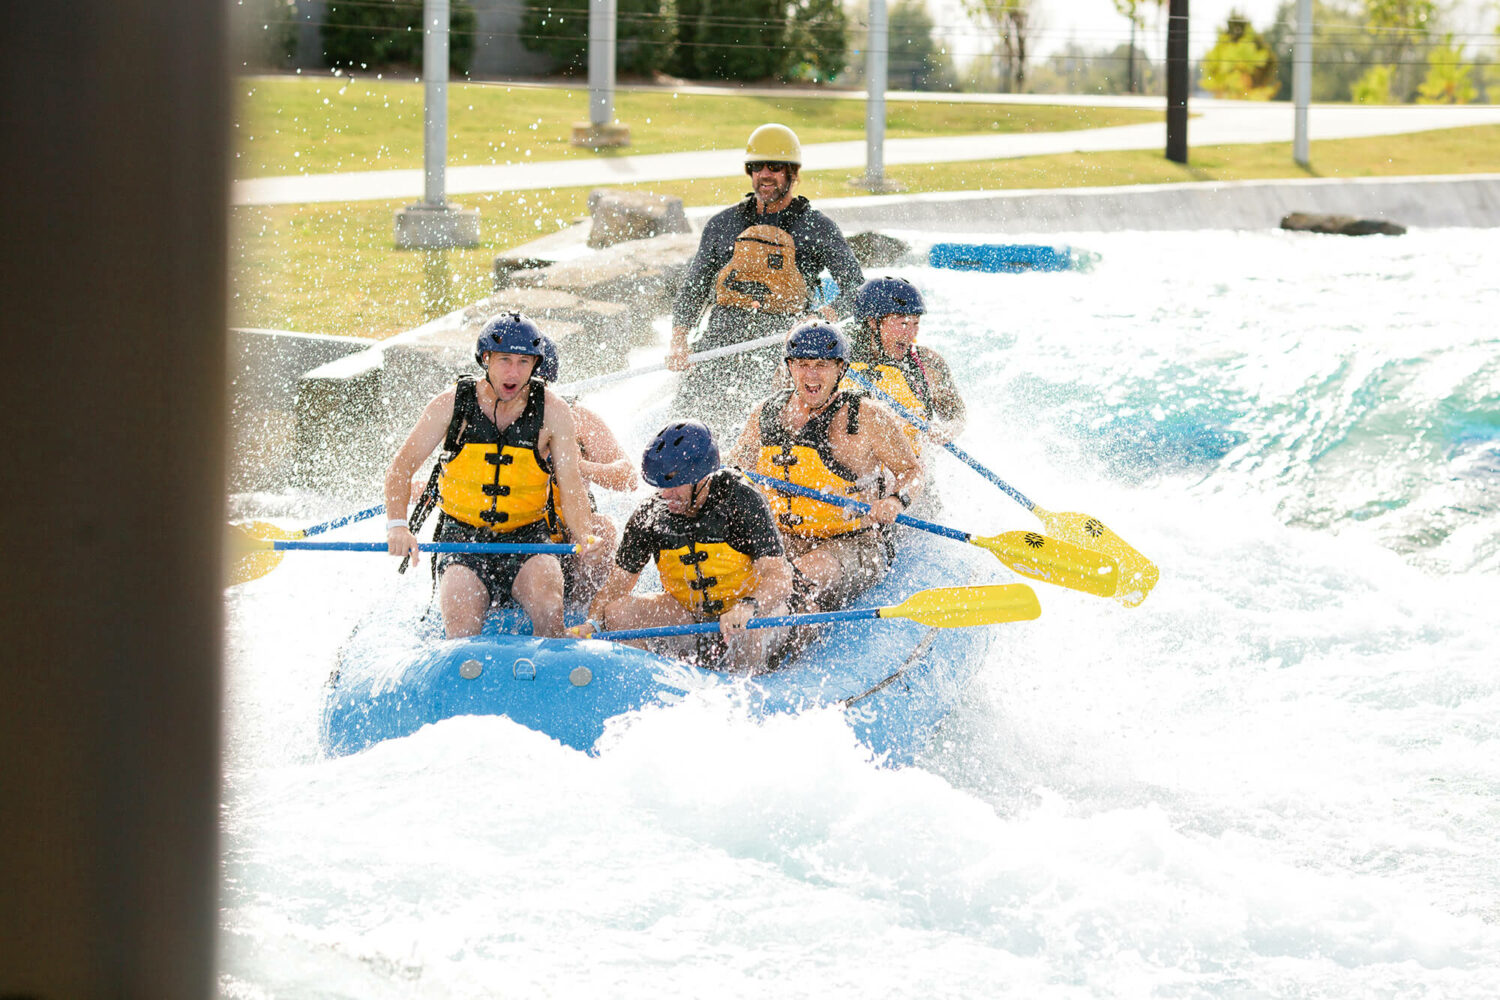 Group of guys whitewater rafting on the most advanced man-made whitewater facility, Montgomery Whitewater Park in Montgomery, Alabama.